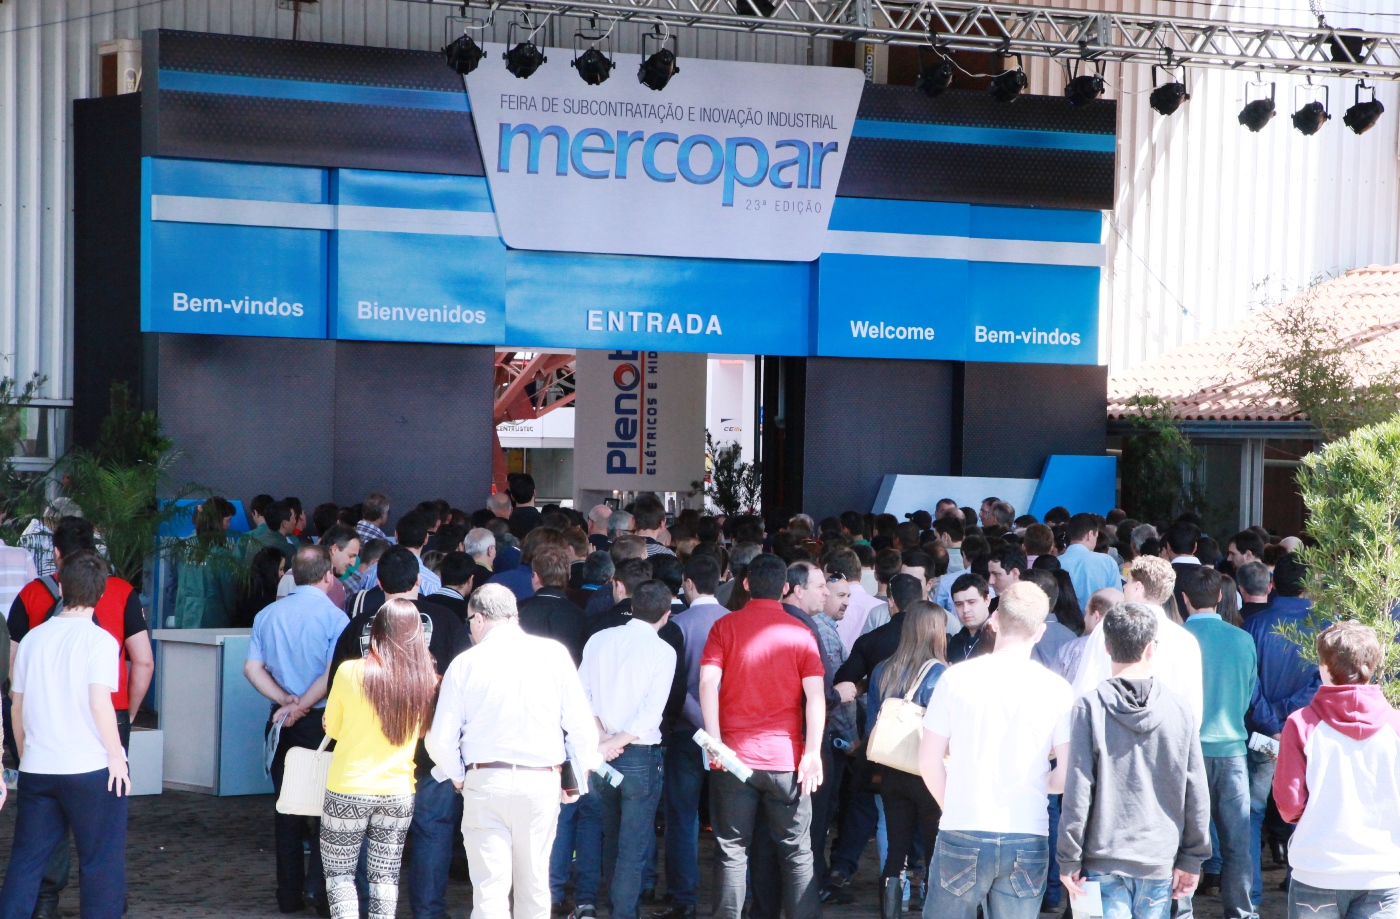 Metal-Mechanic and Automotive APL will be at Mercopar 2015